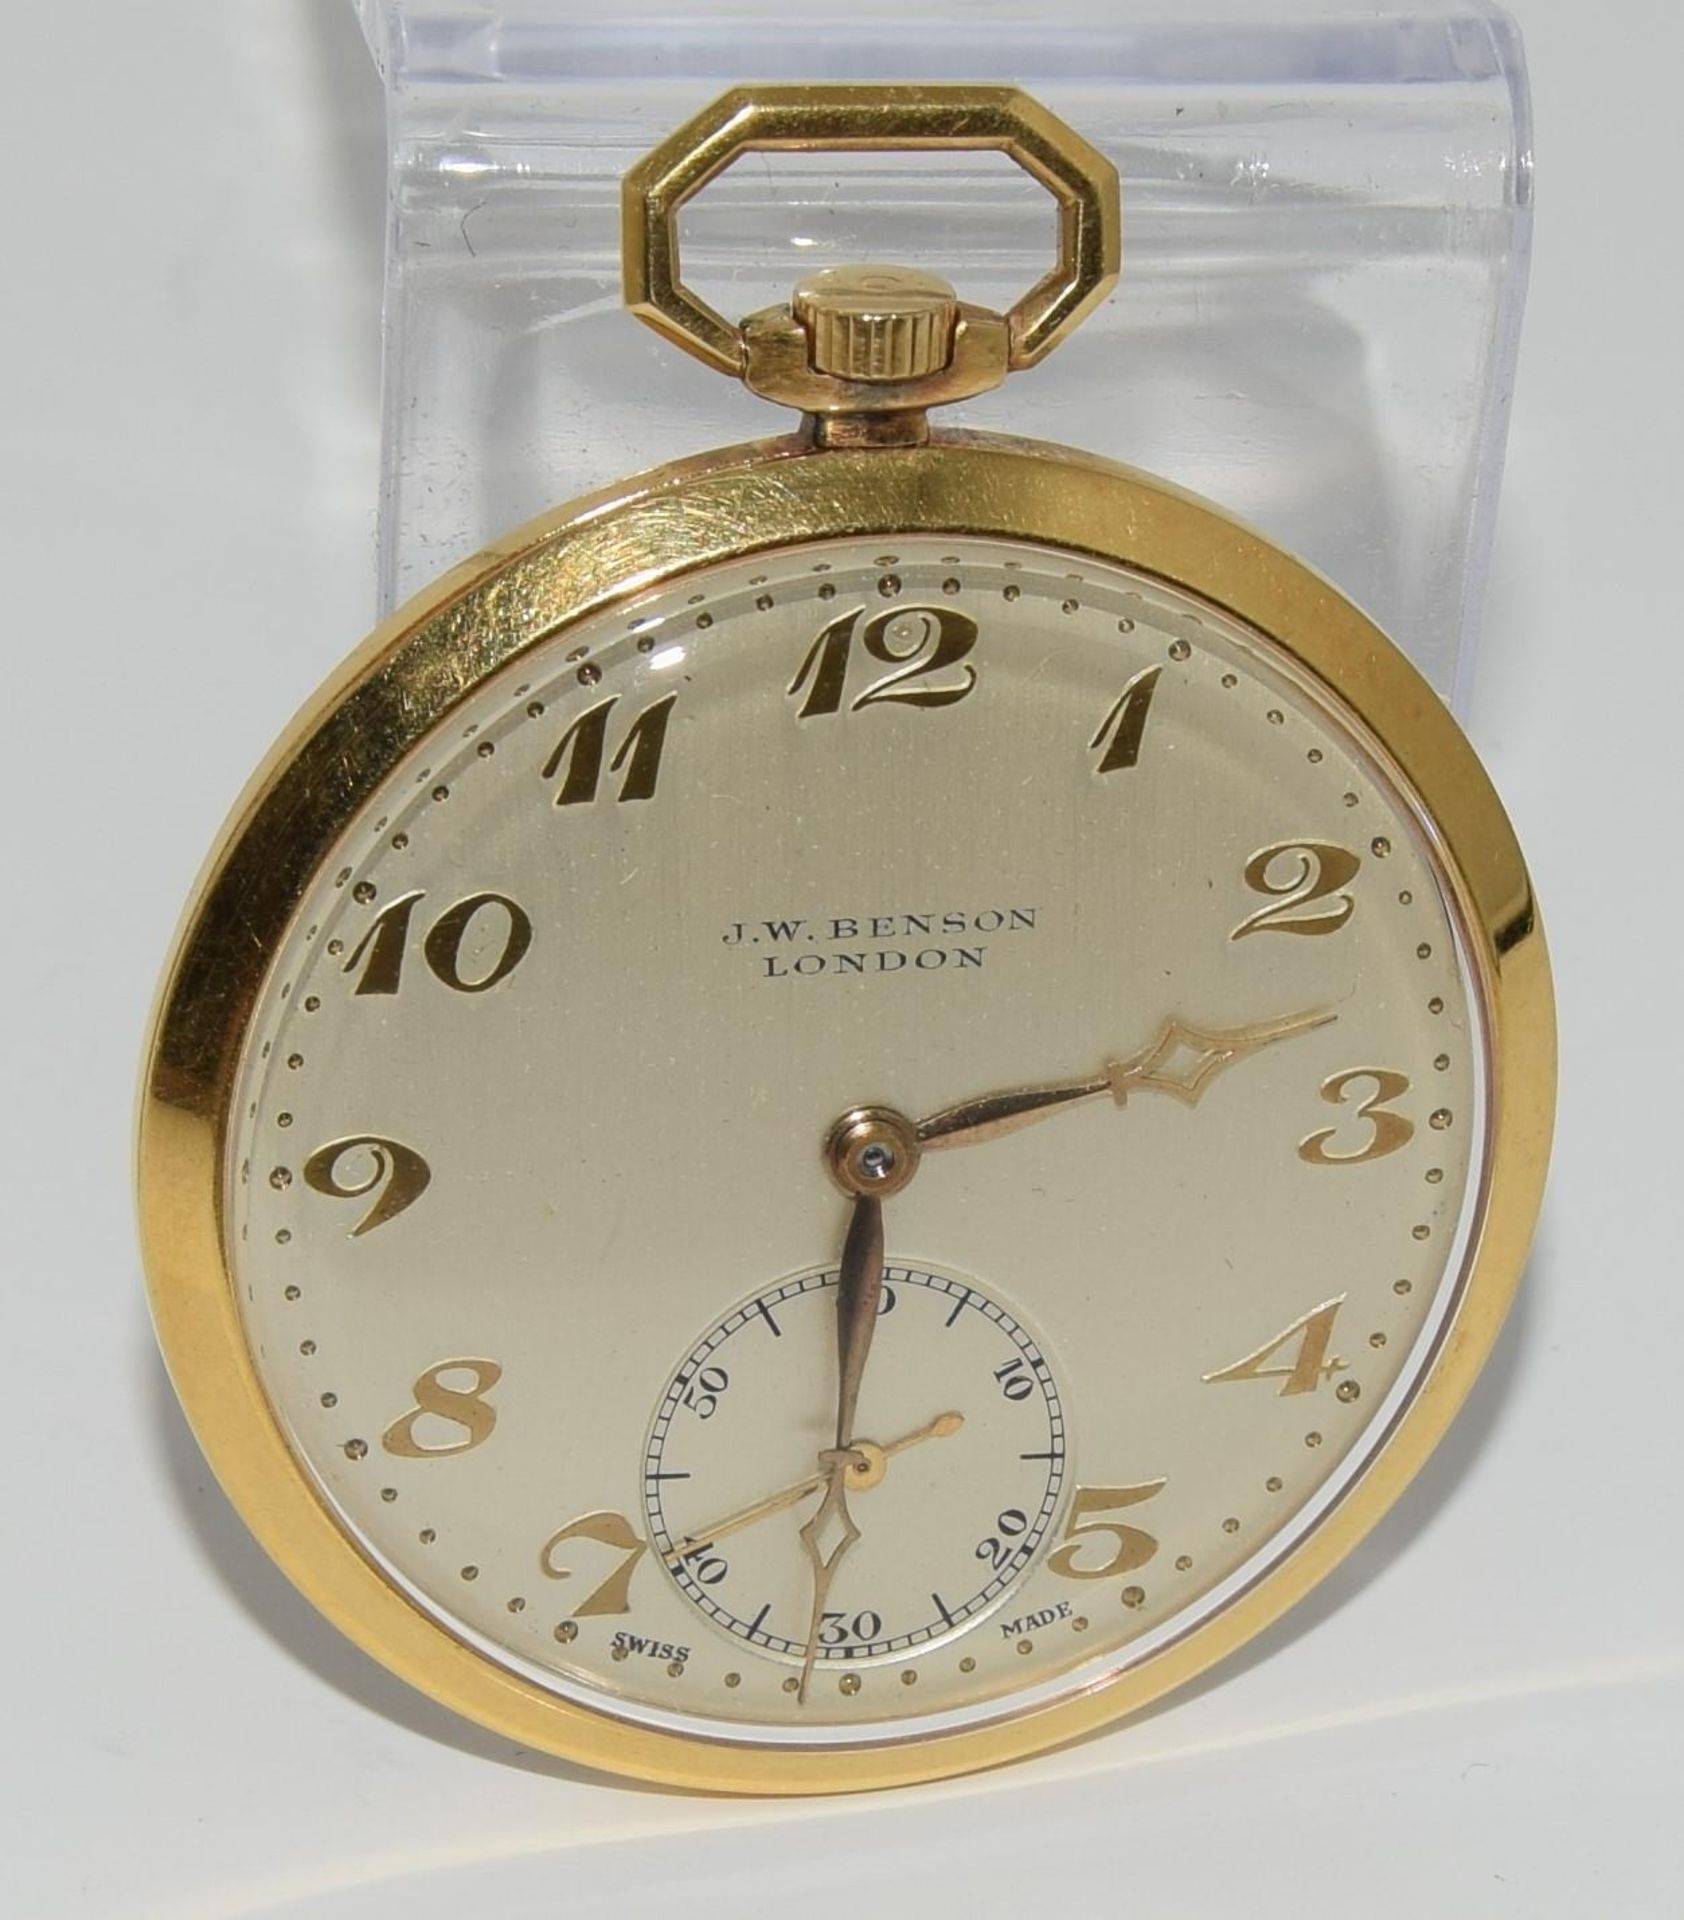 18ct gold open face pocket watch by J.W.Benson London 1935 - Image 7 of 8